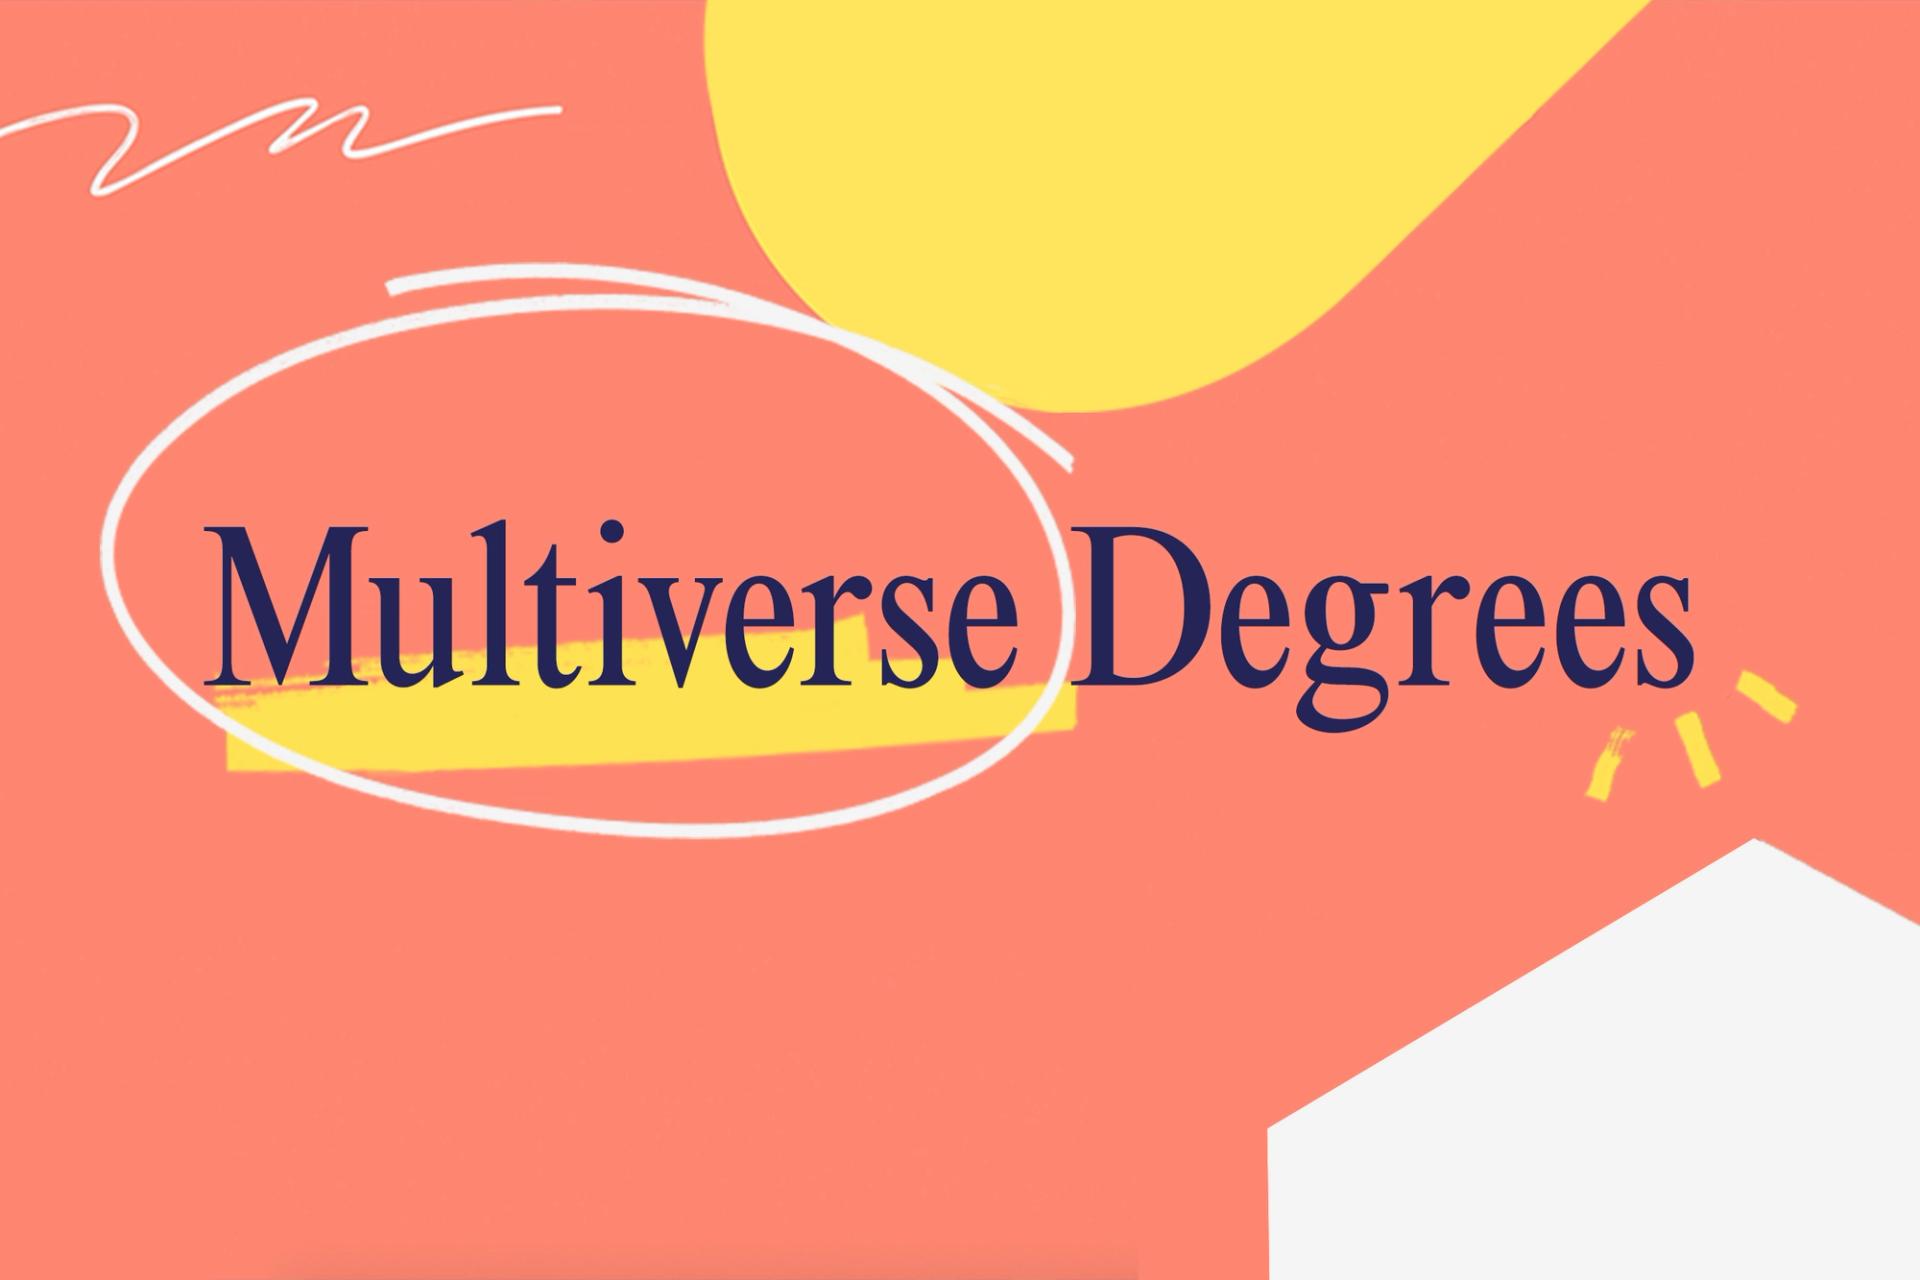 Introducing Multiverse Degrees